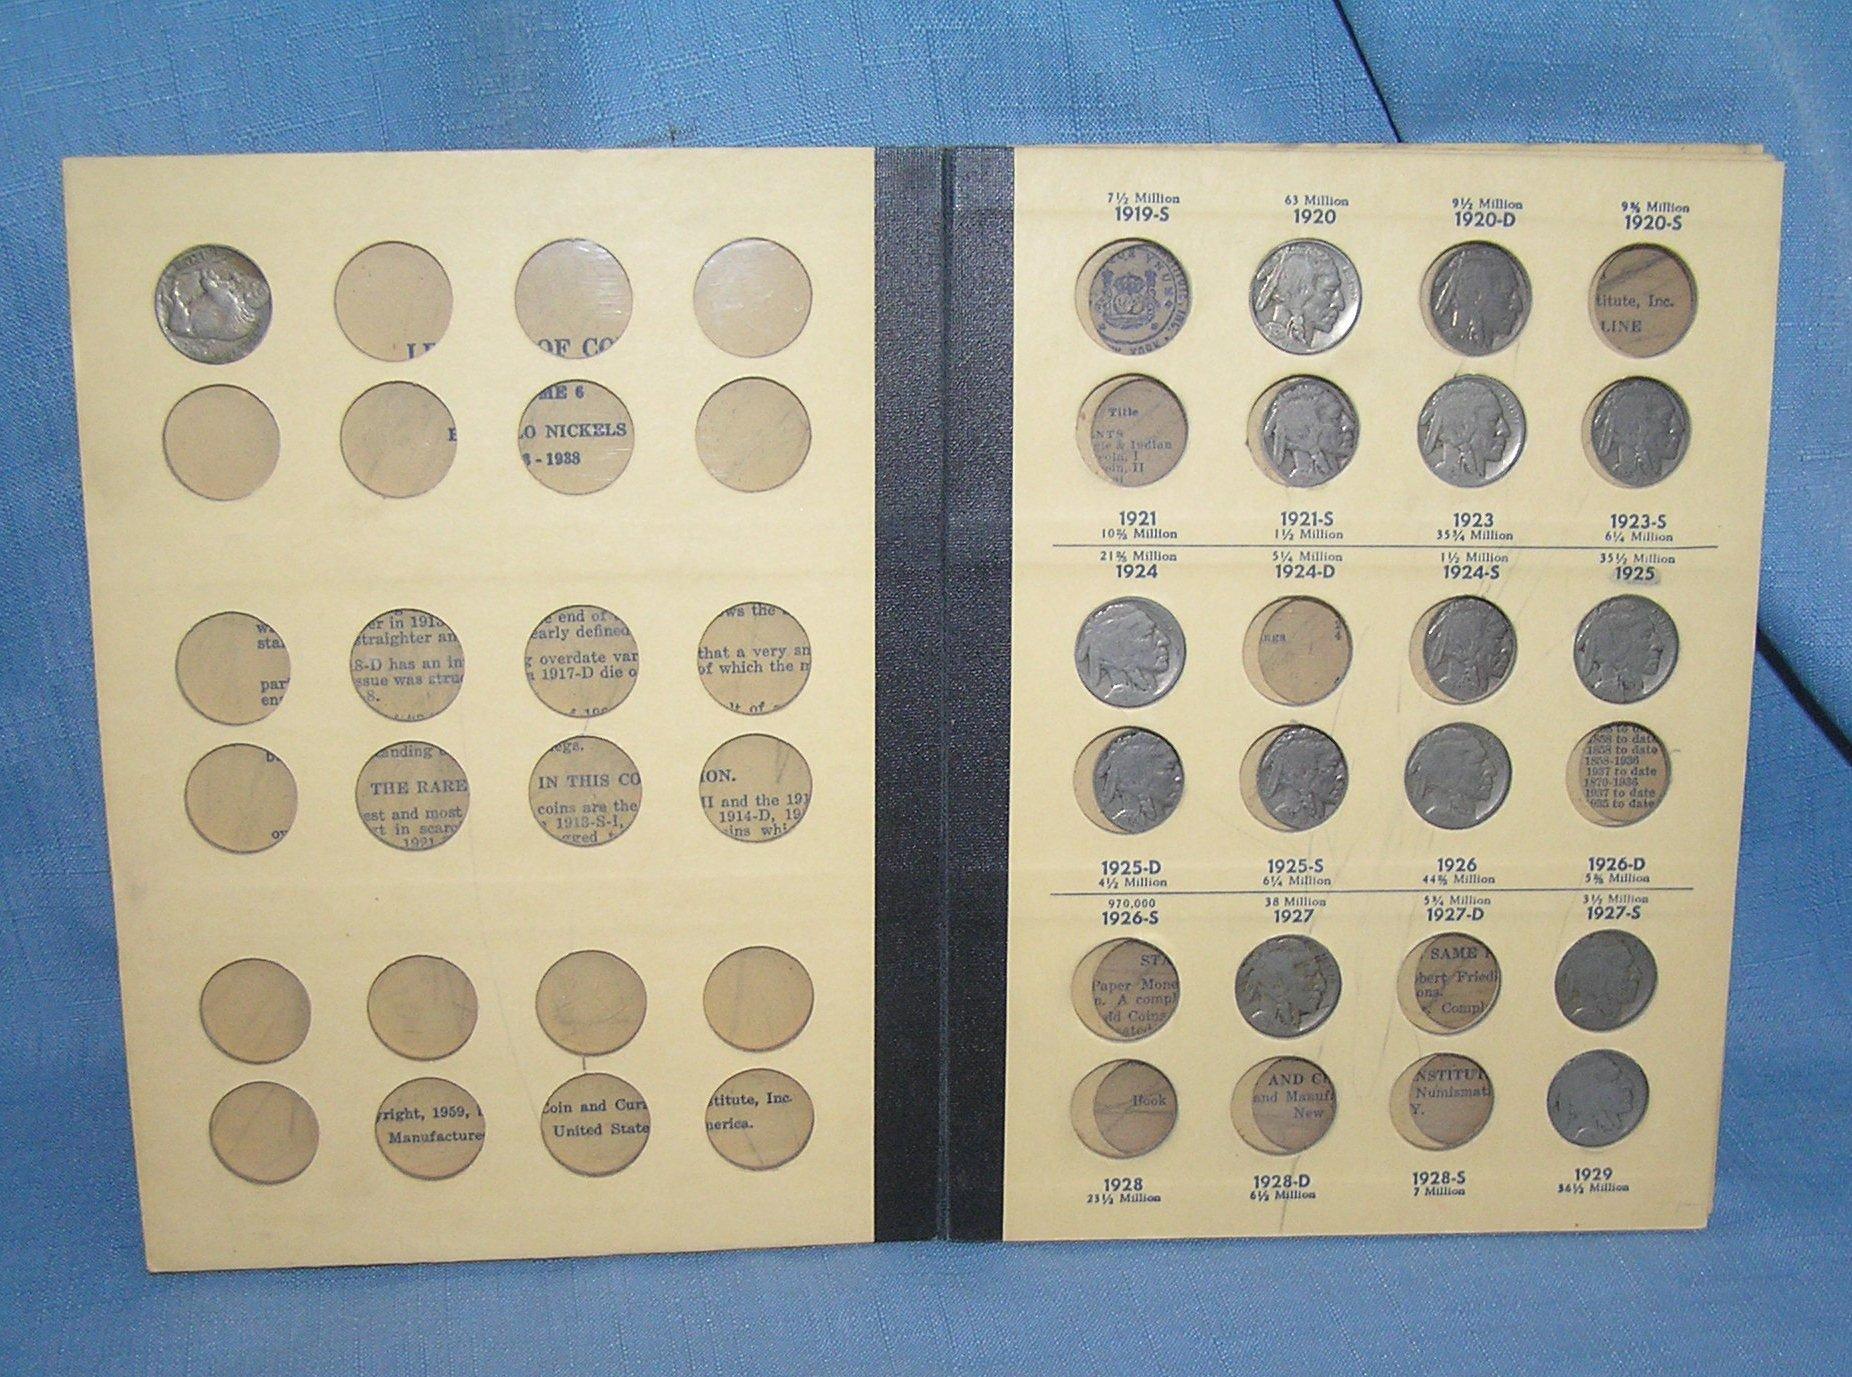 Collection of 17 Buffalo nickels in collector's book